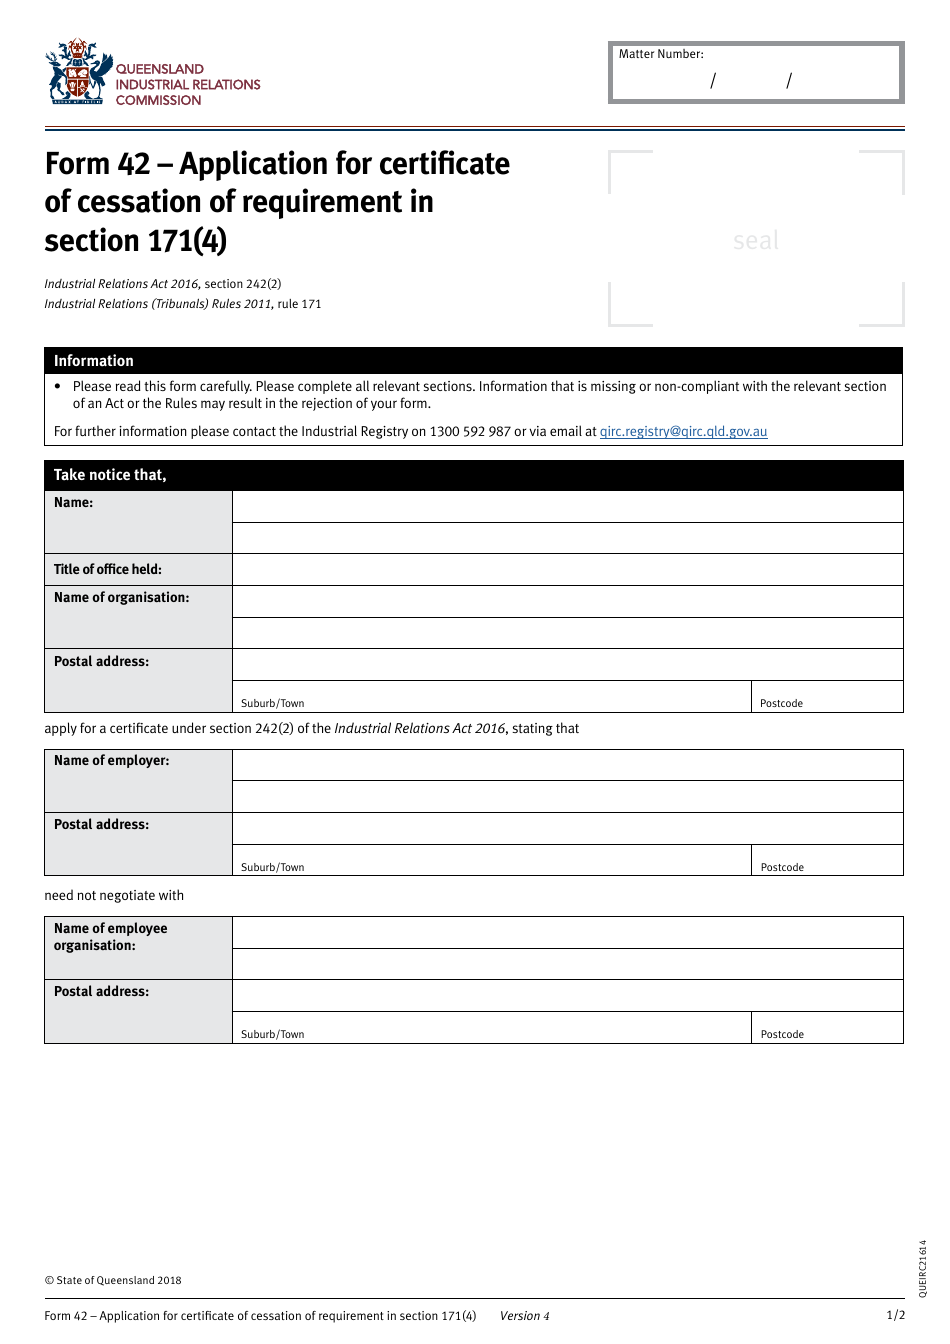 Form 42 Application for Certificate of Cessation of Requirement in Section 171(4) - Queensland, Australia, Page 1